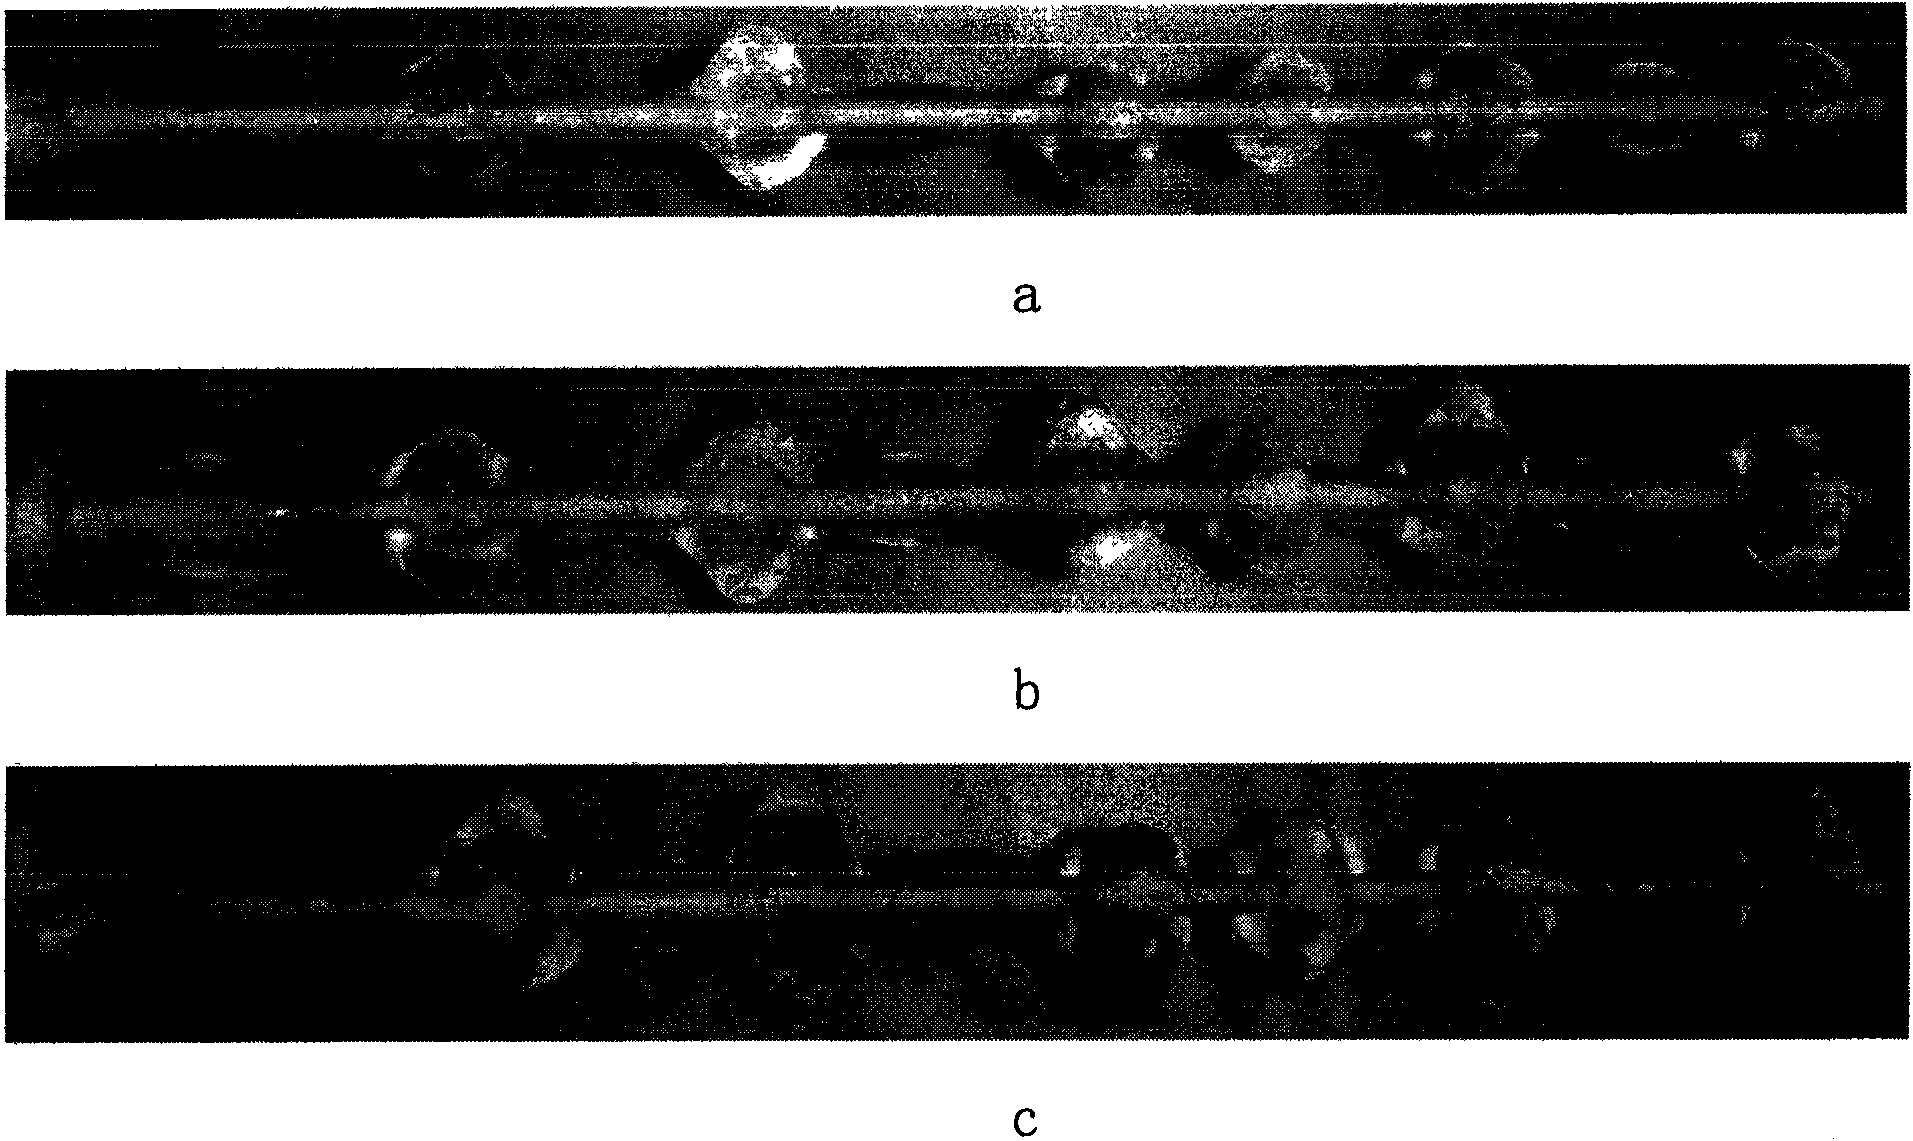 Method for preventing ice from covering surface of power transmission bare conductor